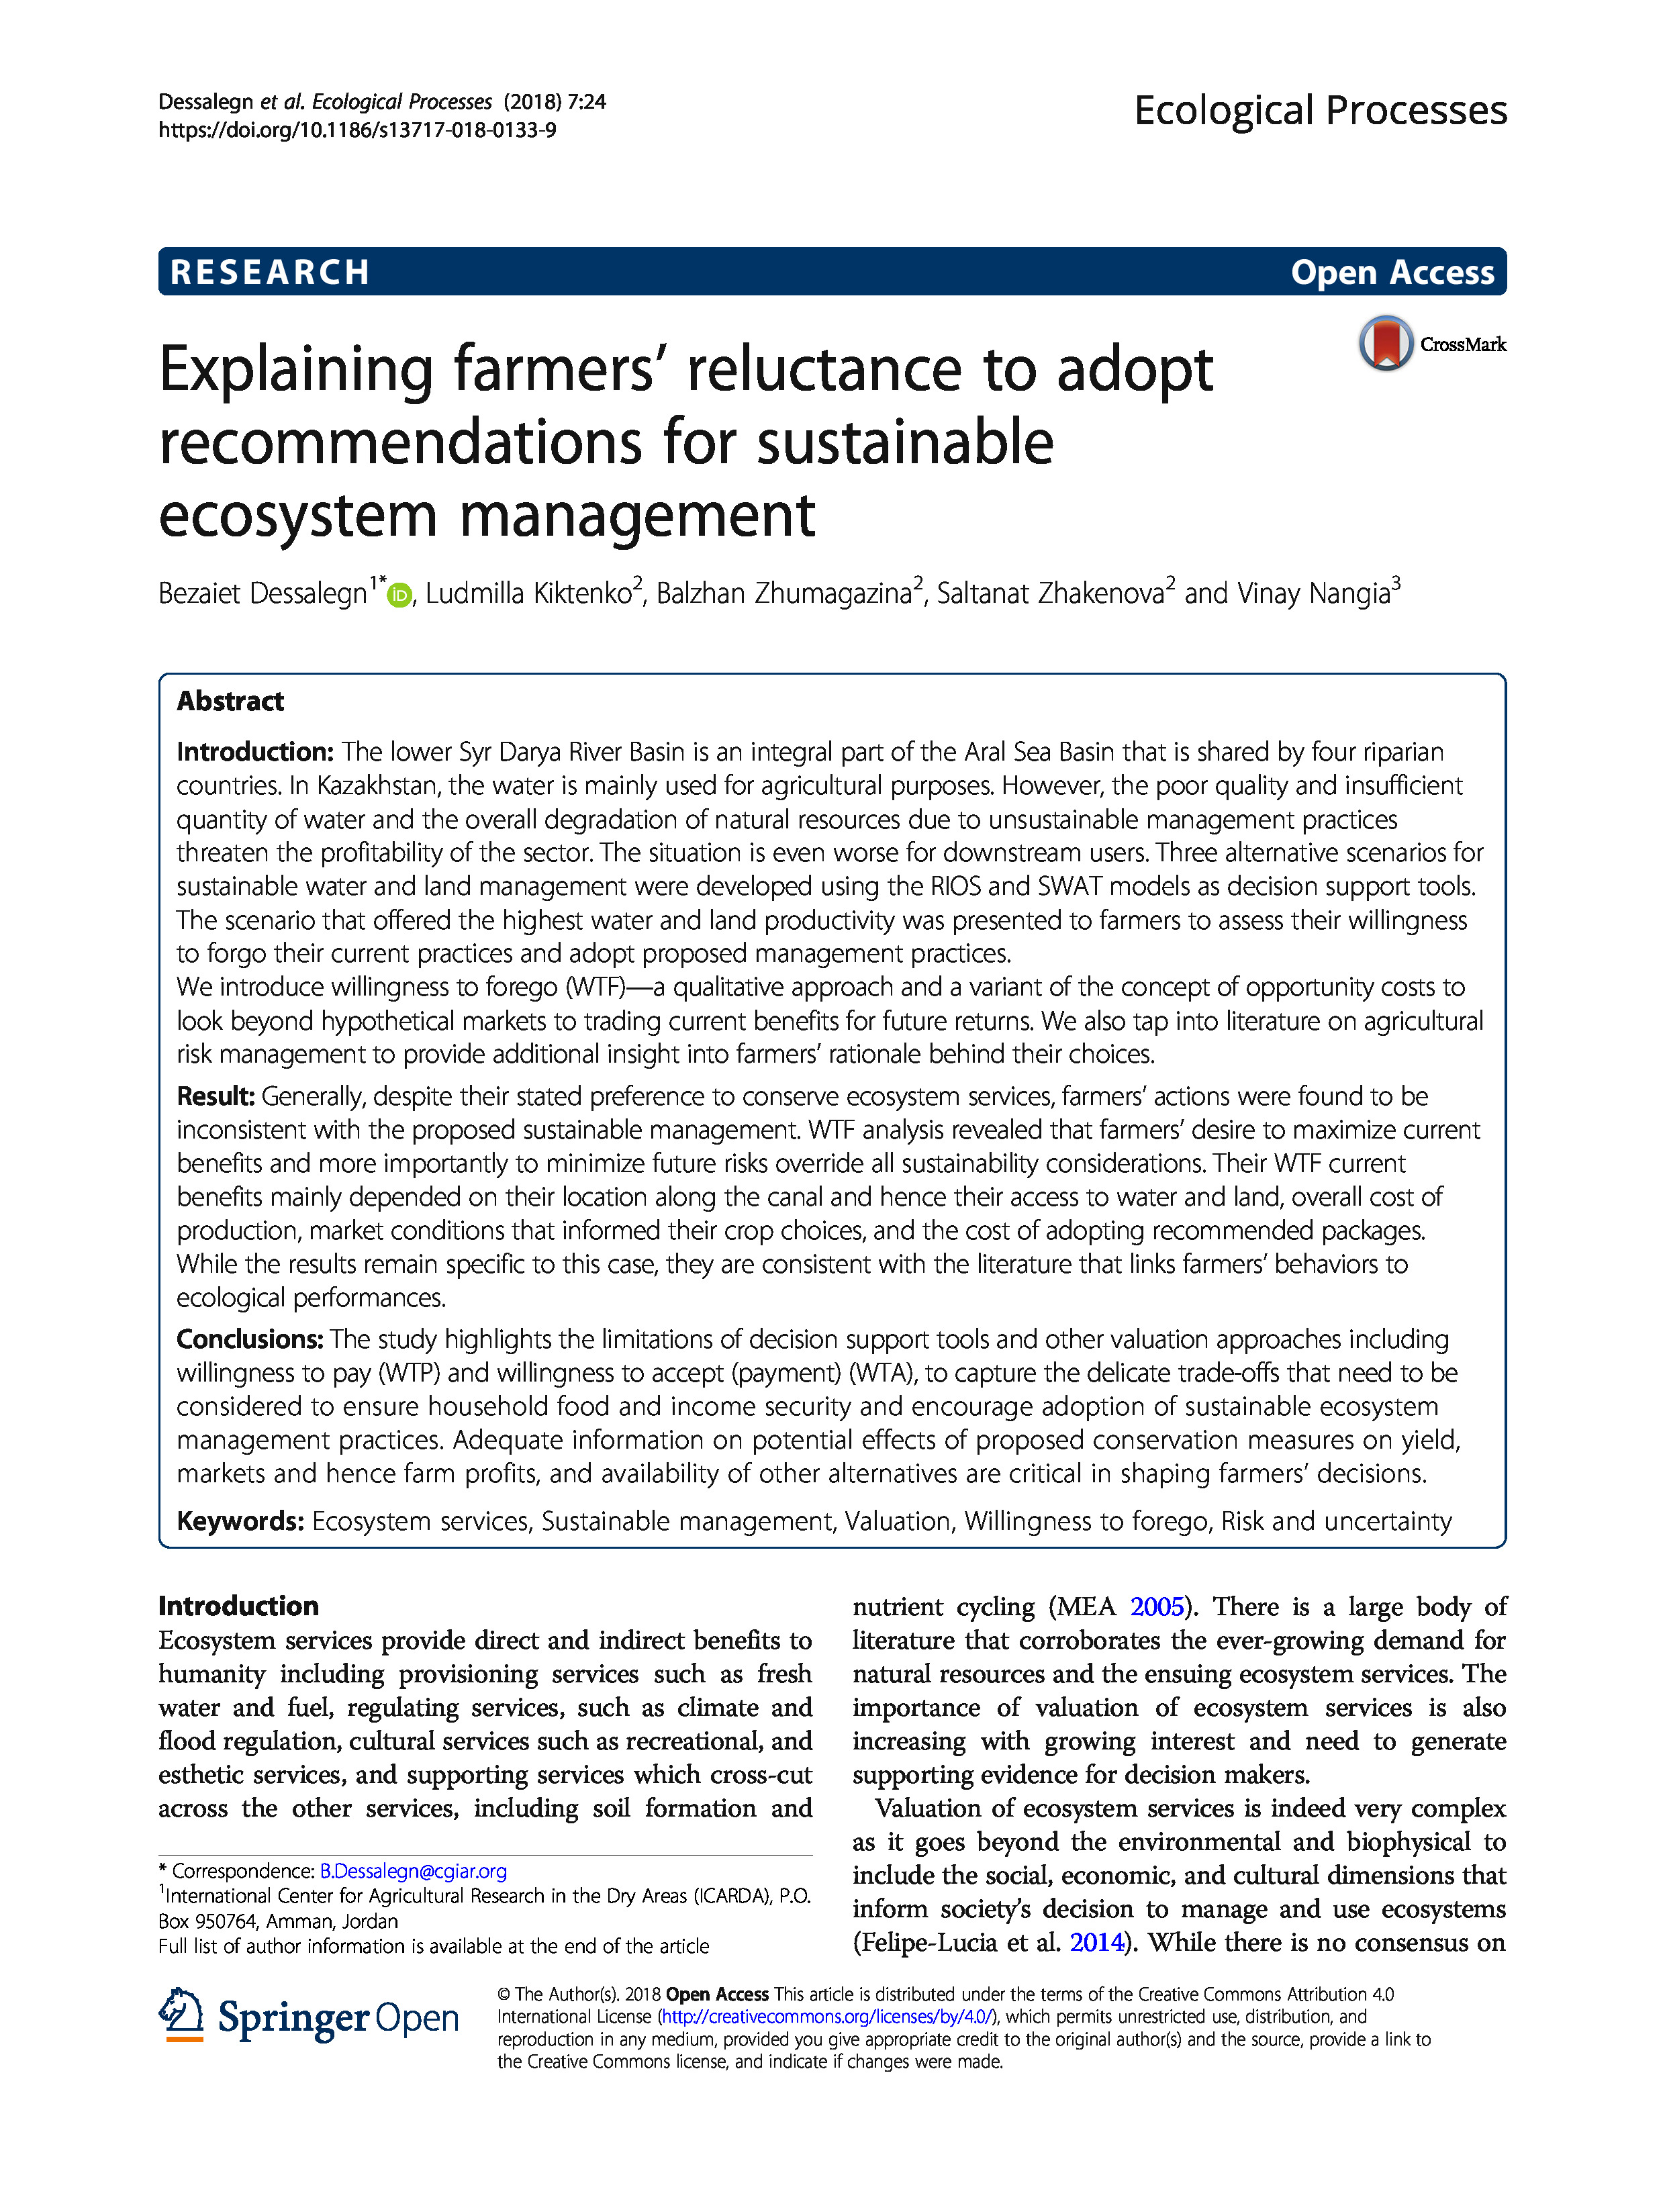 Explaining farmers’ reluctance to adopt recommendations for sustainable ecosystem management